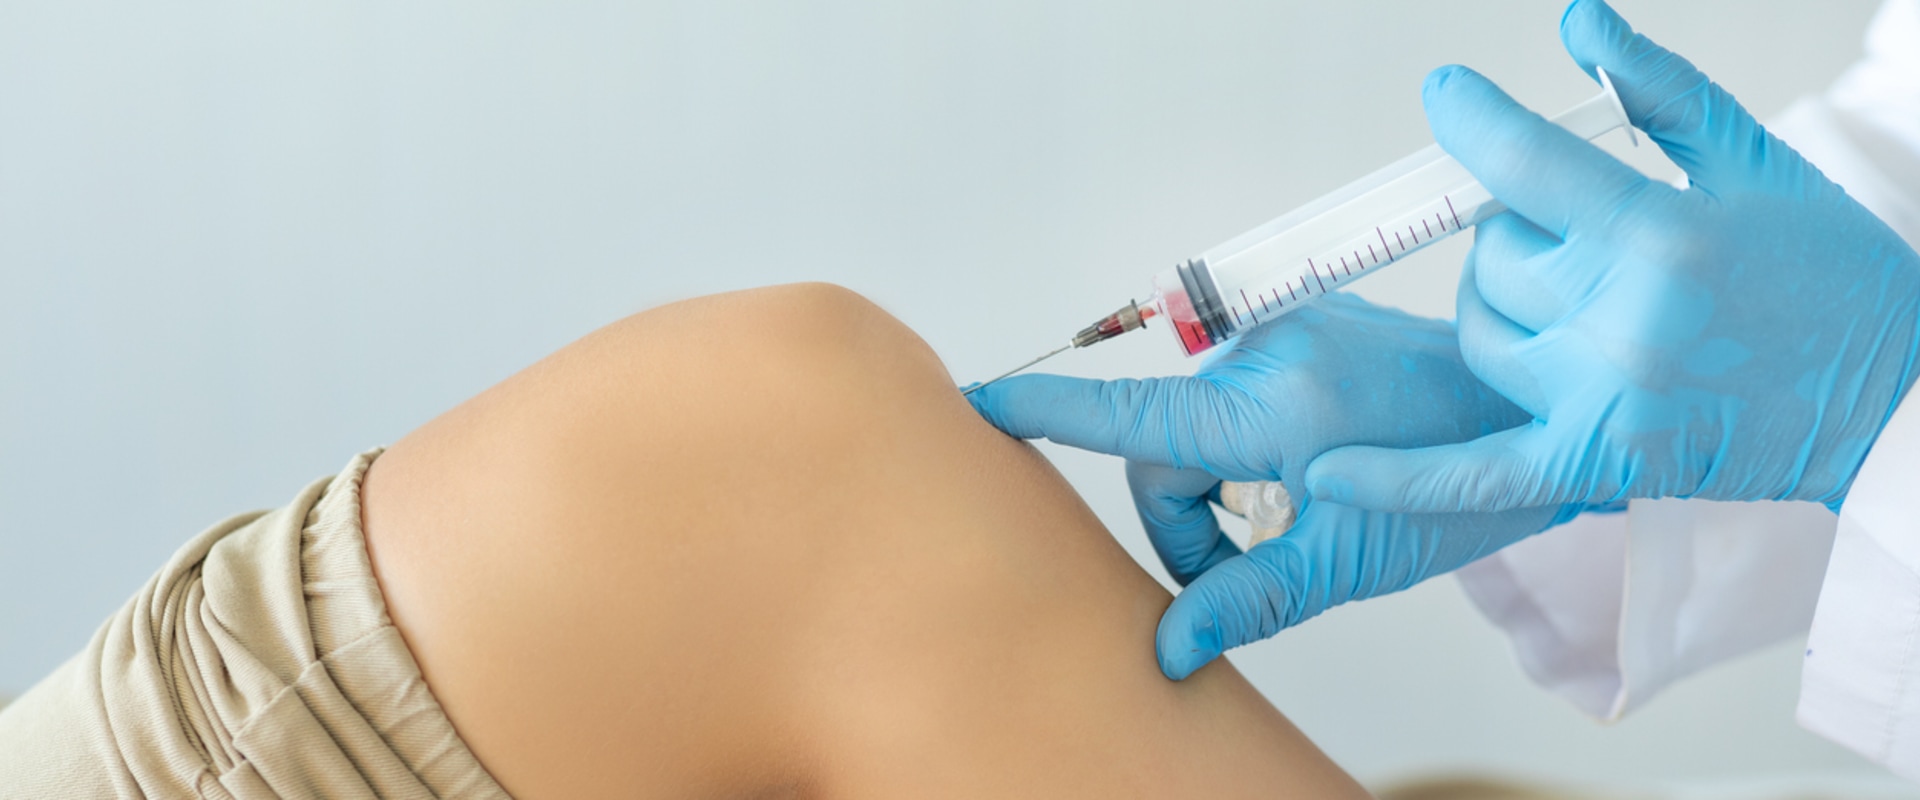 How Long Does Pain Last After PRP Injection?